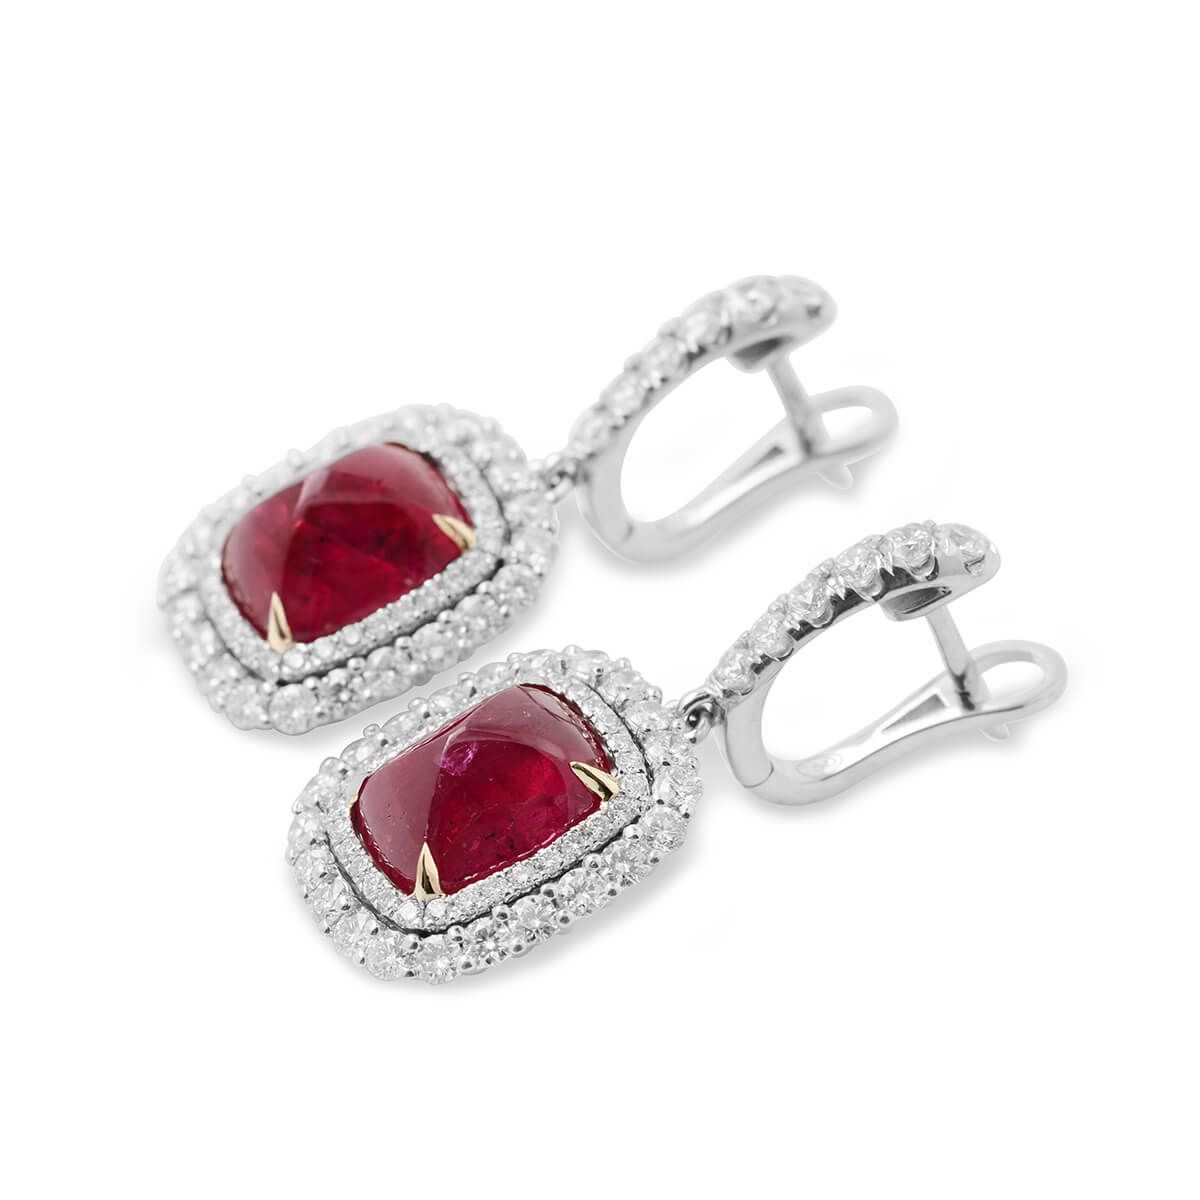 Natural Red Tanzania Ruby Earrings, 12.11 Ct. (14.84 Ct. TW), GRS Certified, GRS2010-112293, Unheated